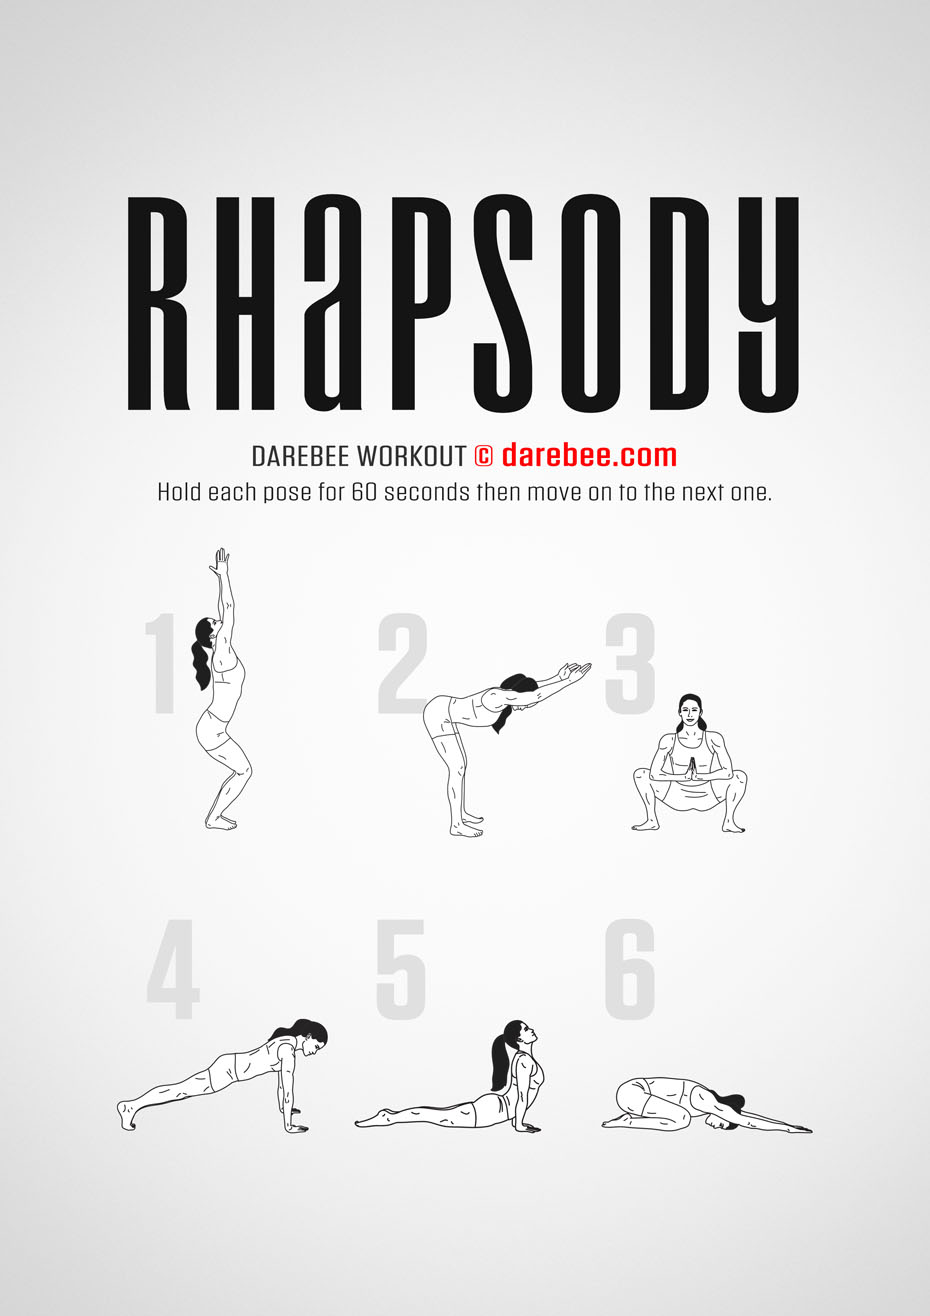 Rhapsody is a Darebee no-equipment home-fitness bodyweight workout that simply makes you feel good.